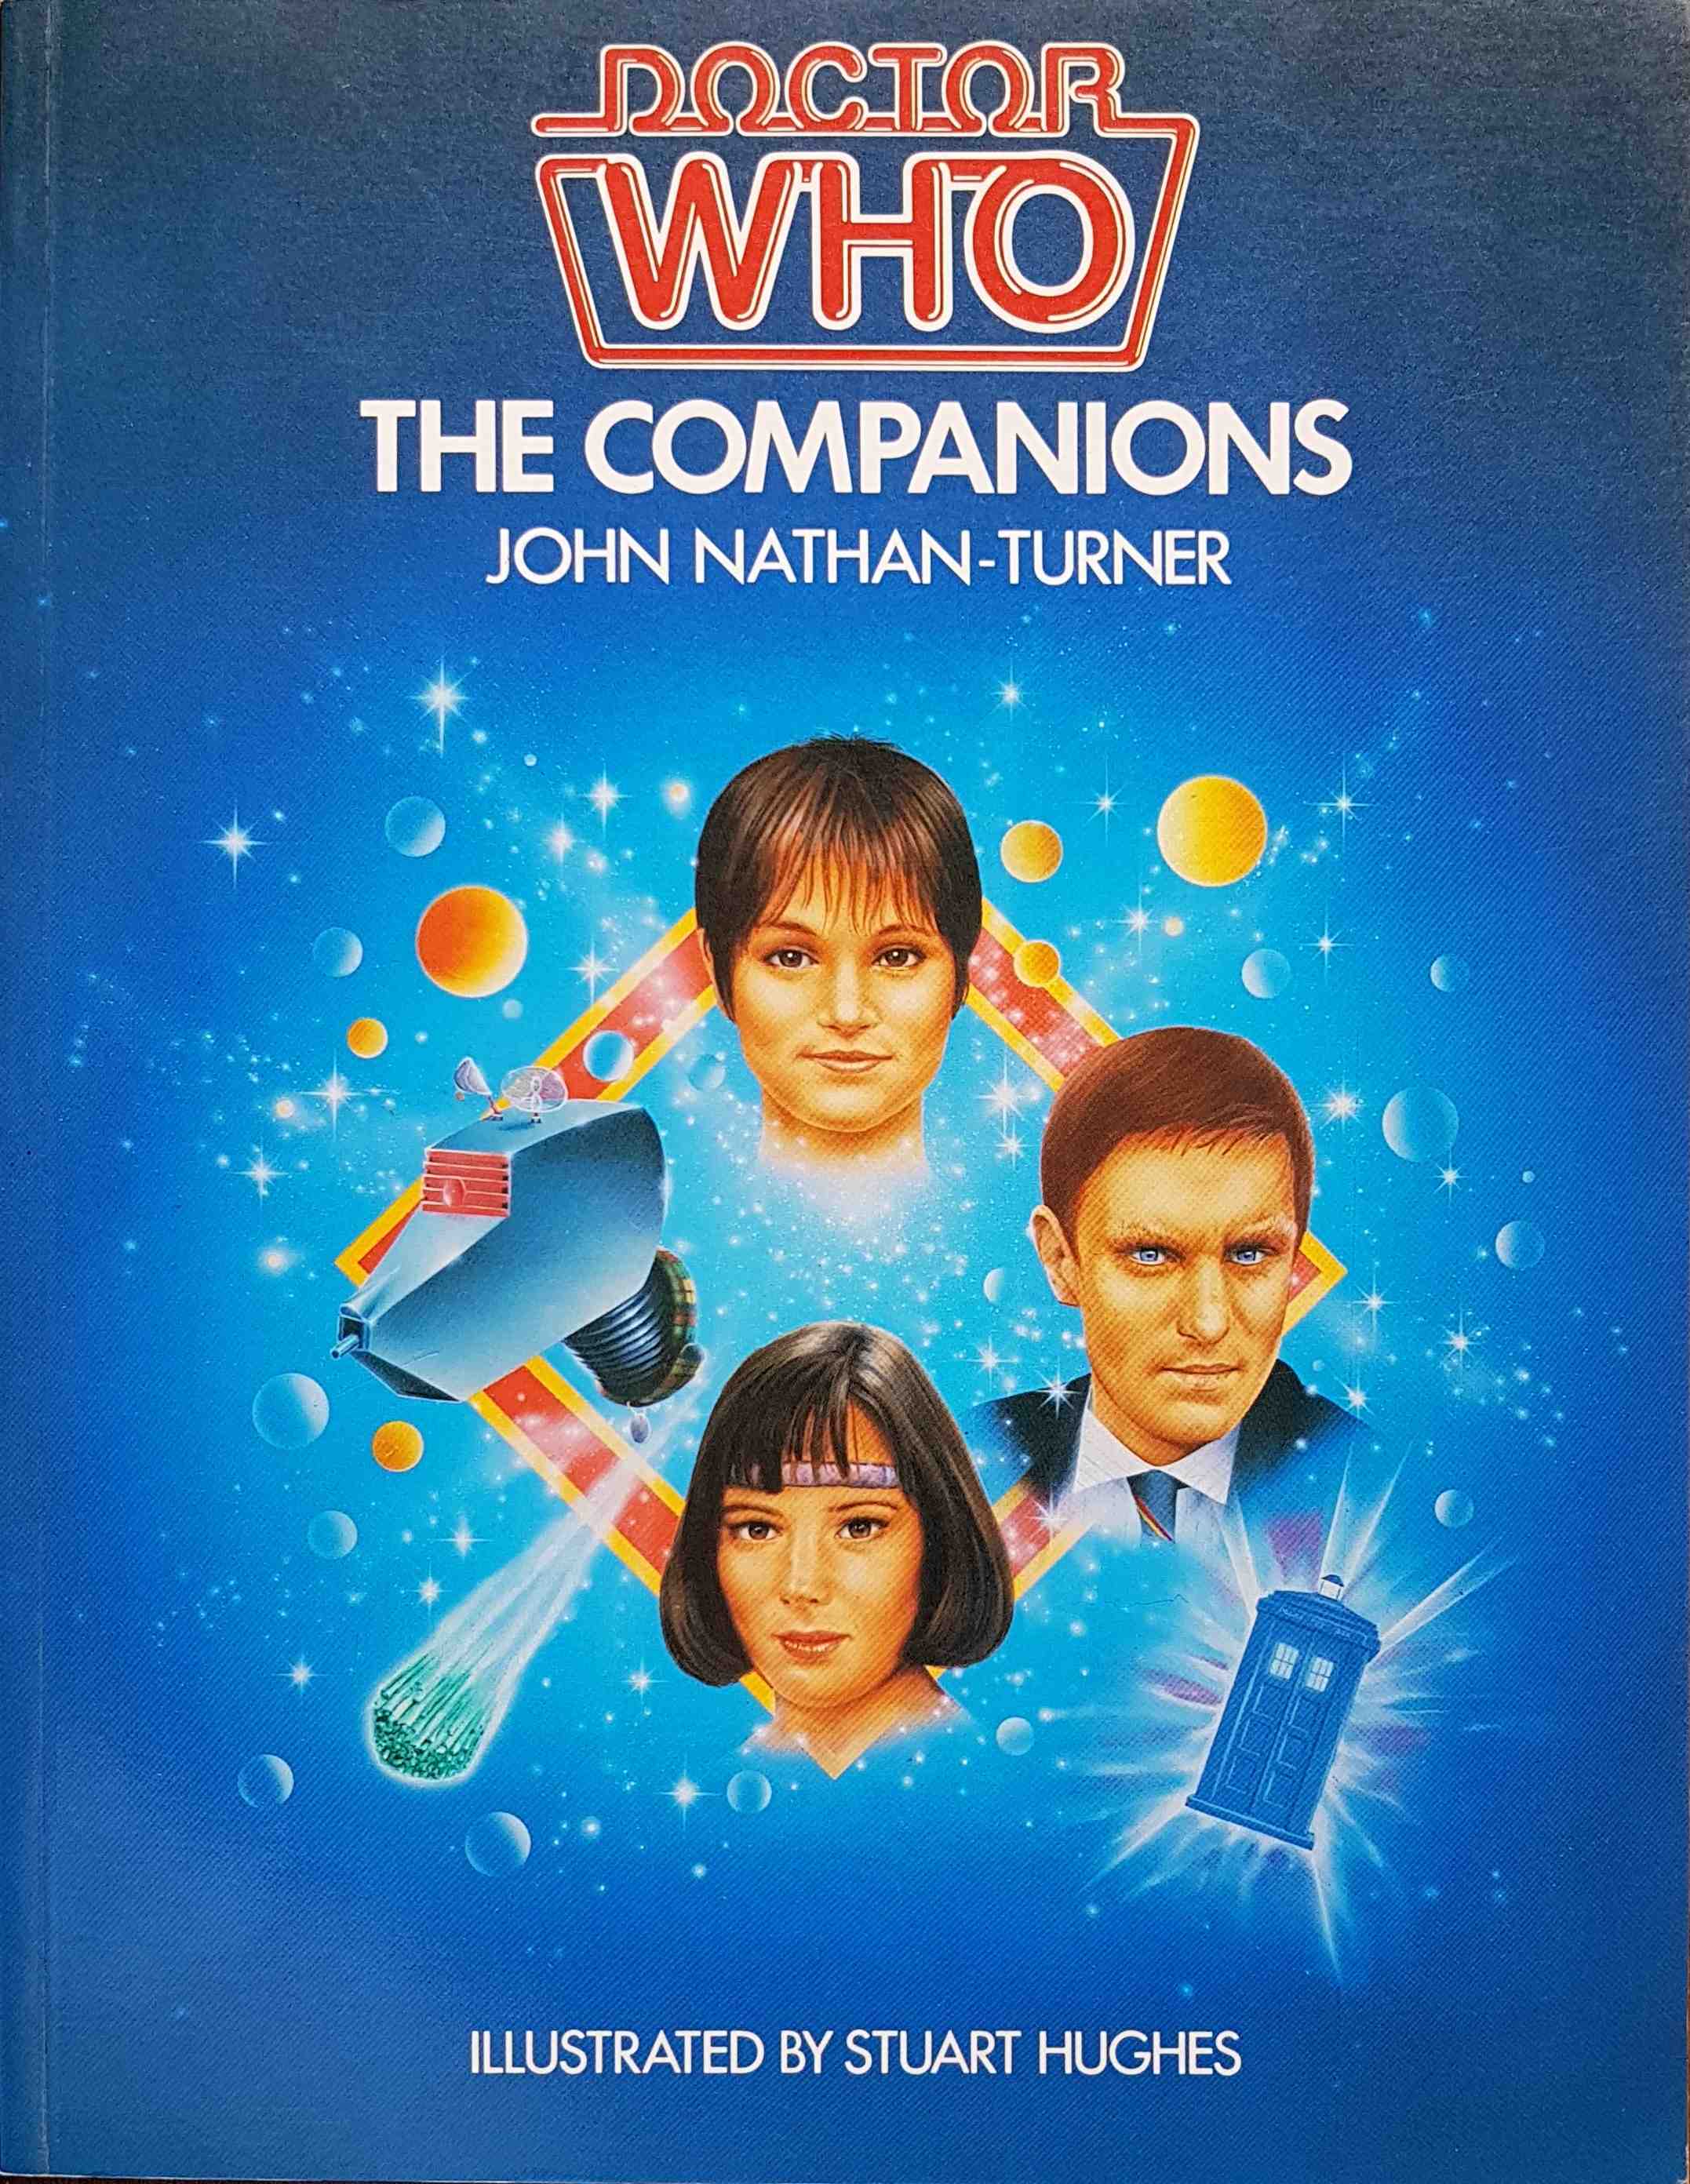 Picture of 0946826-29-3 Doctor Who - The companions by artist John Nathan-Turner from the BBC records and Tapes library